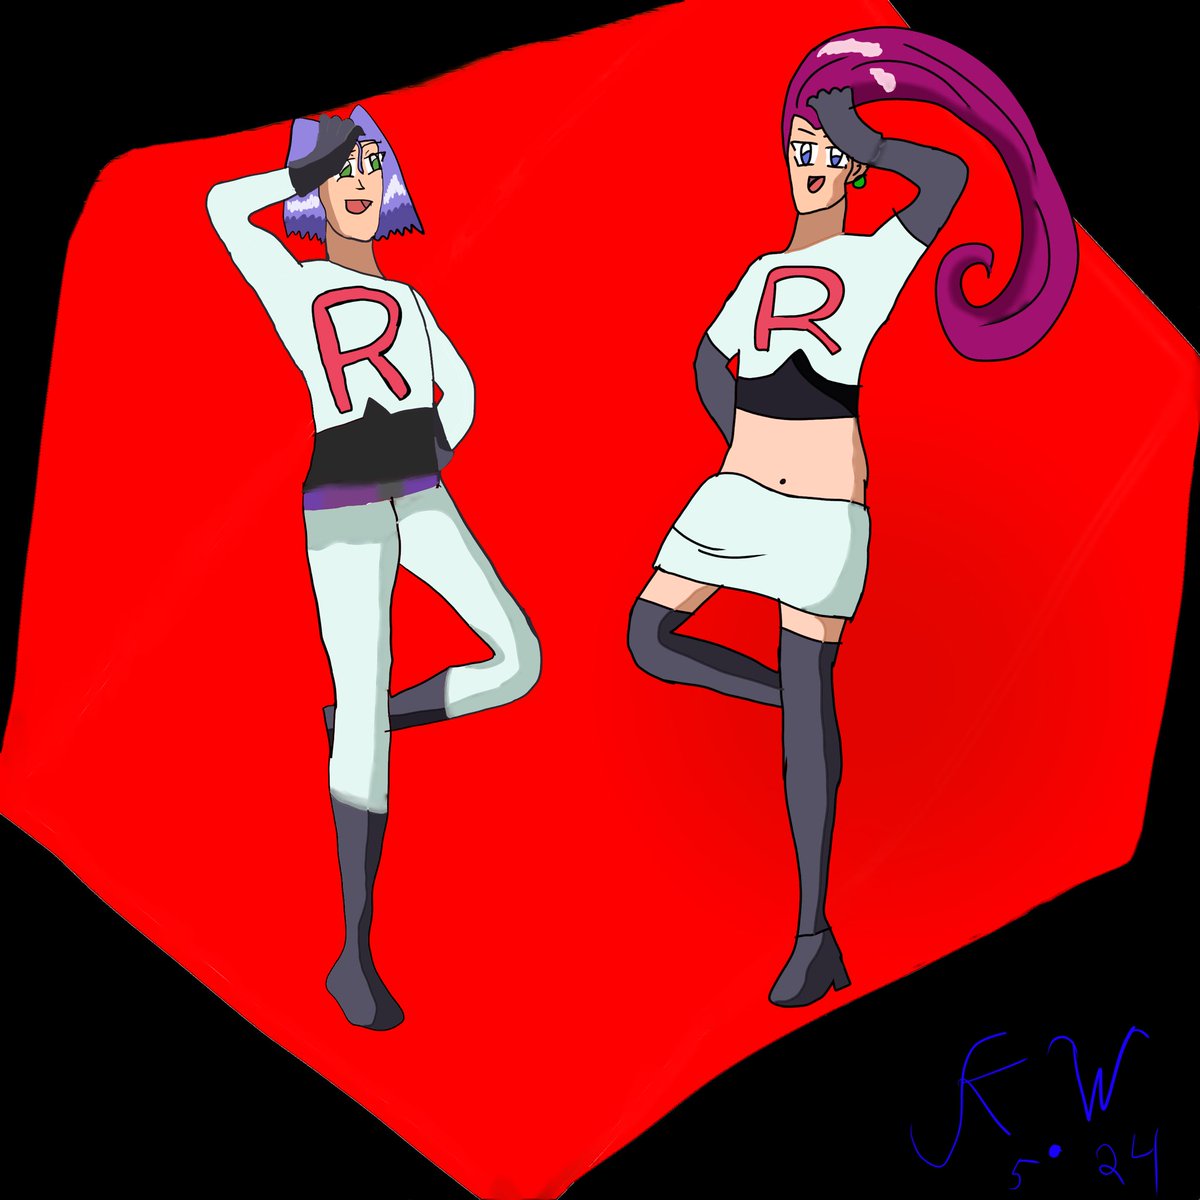 Team rocket here to steal your Pokemon
 (Artwork made on ibis paint and clip studio pro)

Made by @kewajii1 
#Pokemon #teamrocket #ibisPaintX #clipstudiopaint #art #artwork #digitalart